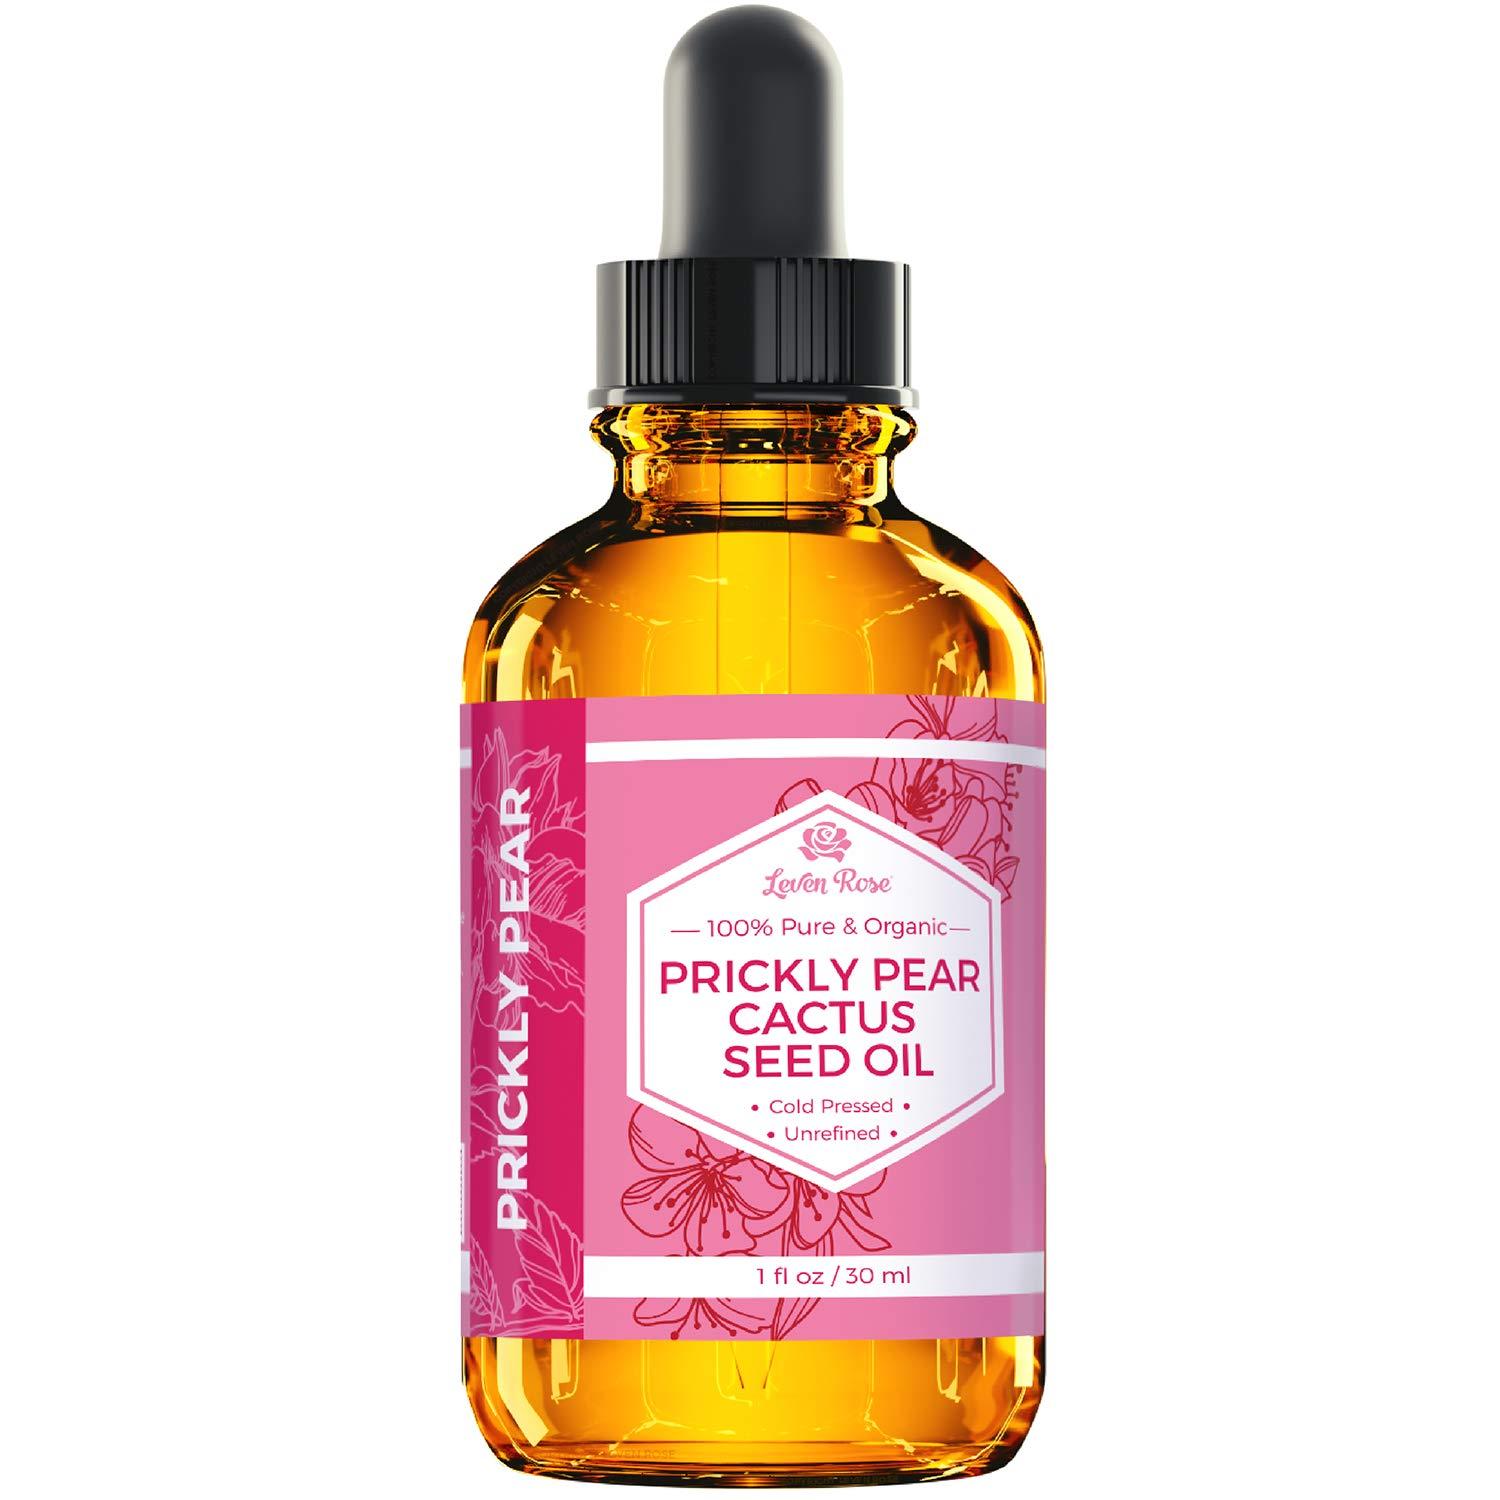 Prickly Pear Cactus Seed Oil (Barbary Fig) by Leven Rose 100% Pure Organic,  Extra Virgin, Cold Pressed, All Natural Face, Dry Skin & Body Moisturizer  and Damaged Hair Treatment 1 oz